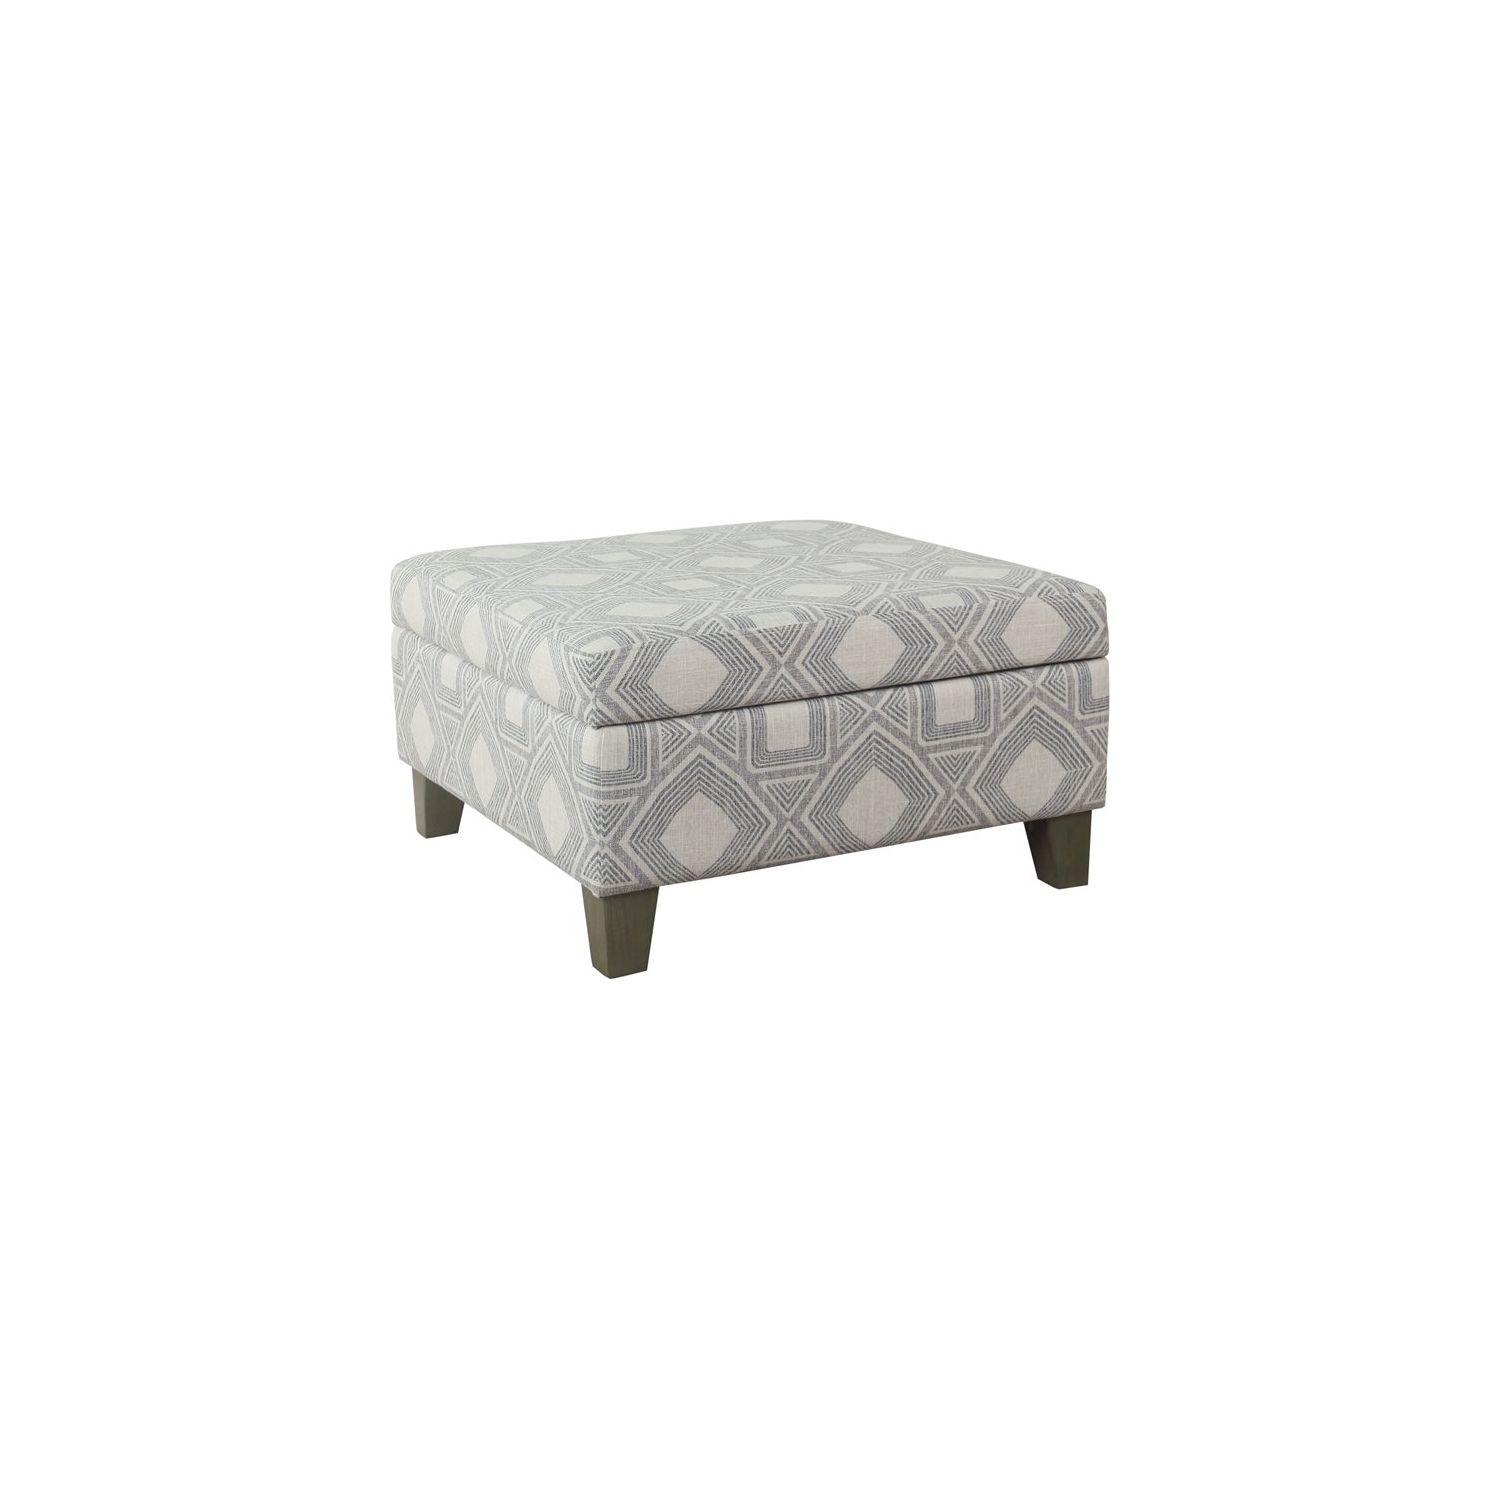 Homepop Luxury 28" Square Transitional Fabric Geometric Storage Ottoman In  Gray | Best Buy Canada Intended For Geometric Gray Ottomans (View 2 of 15)